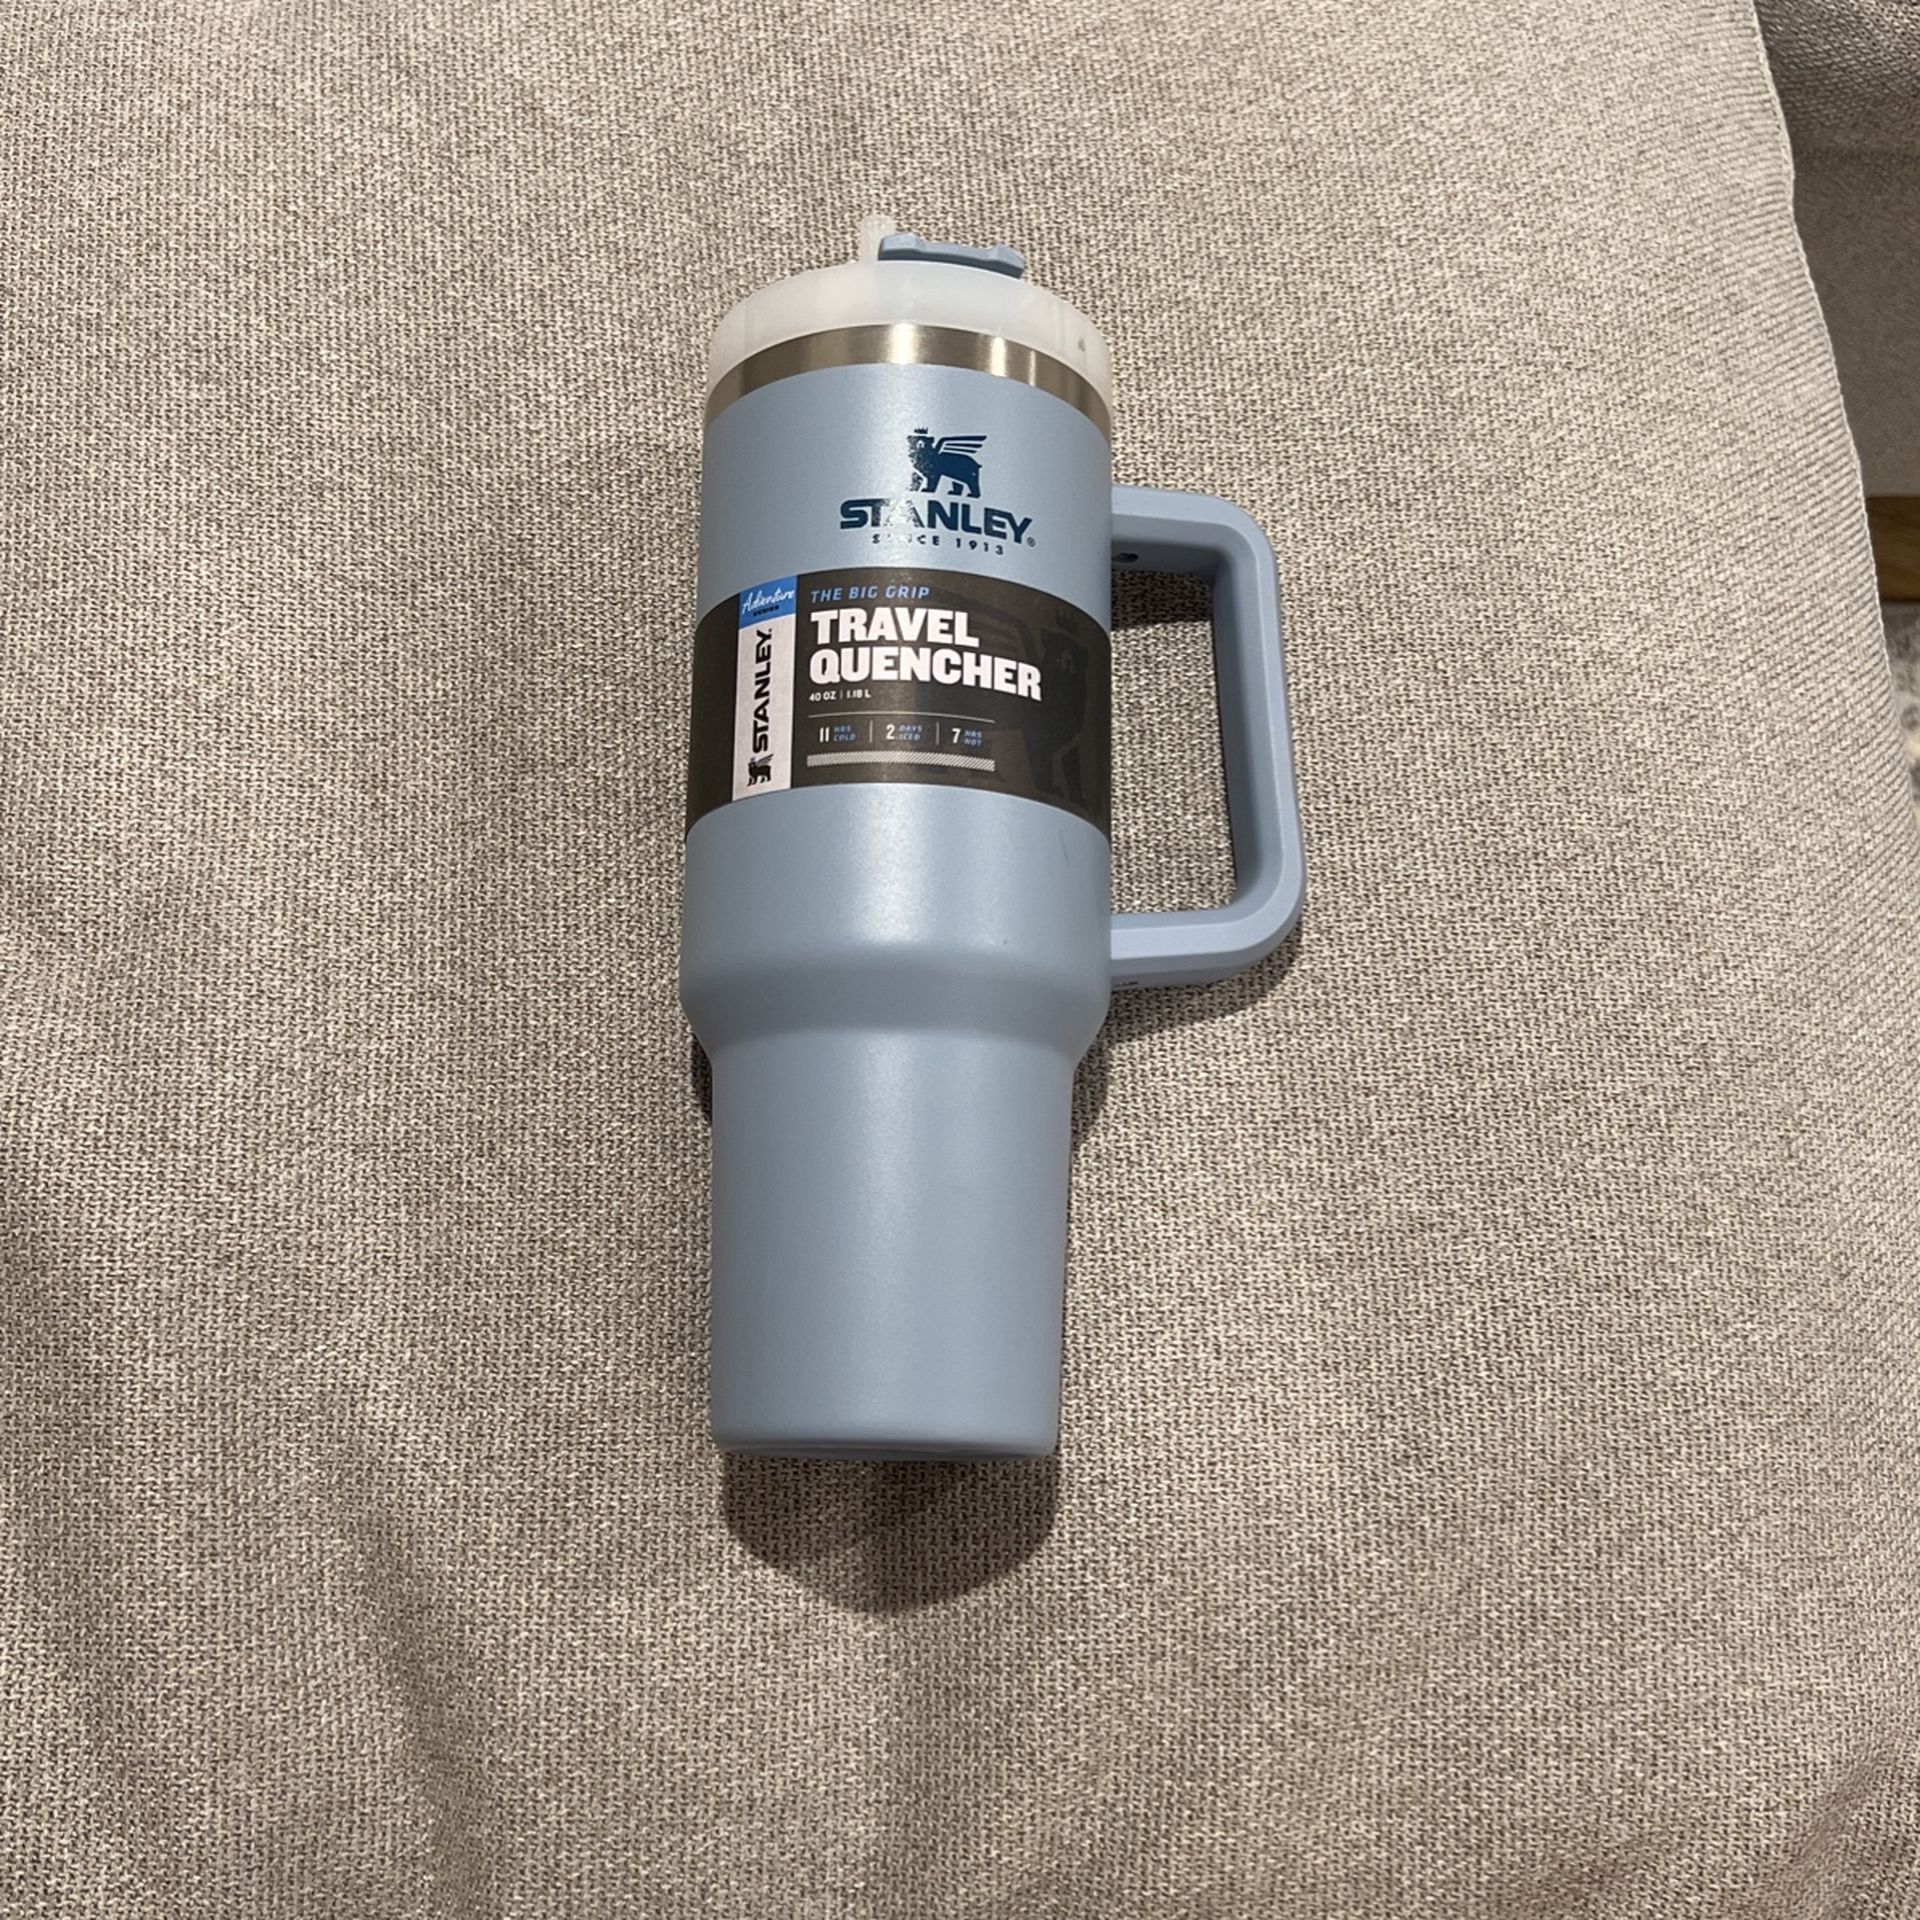 Brand New Stanley Big Grip Travel Quencher 40oz Tumbler For Sale In Edgewood Wa Offerup 